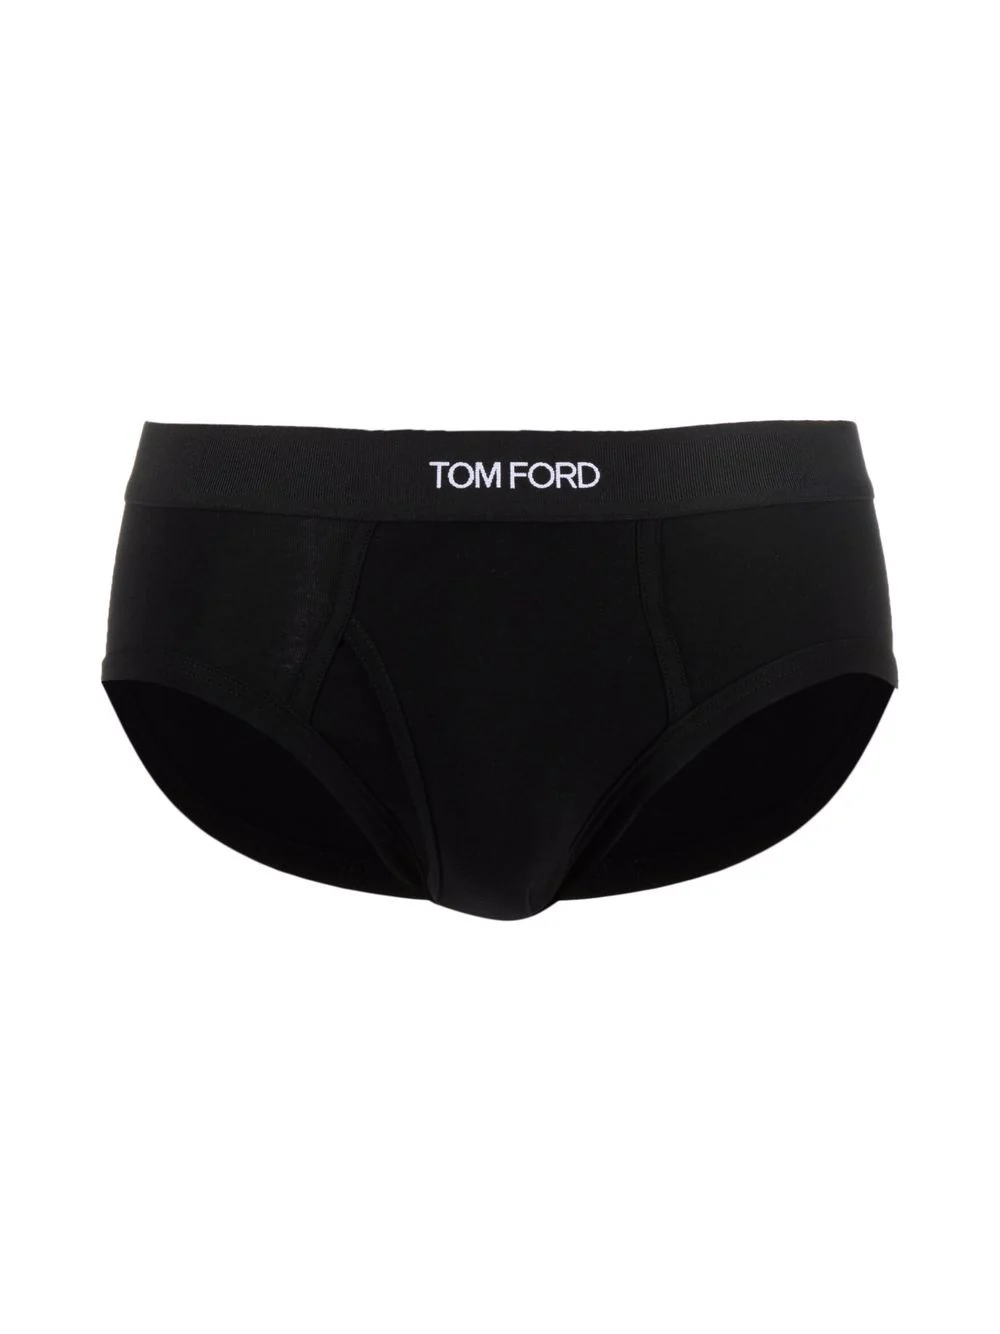 TOM FORD SET OF TWO BOXERS WITH PRINT